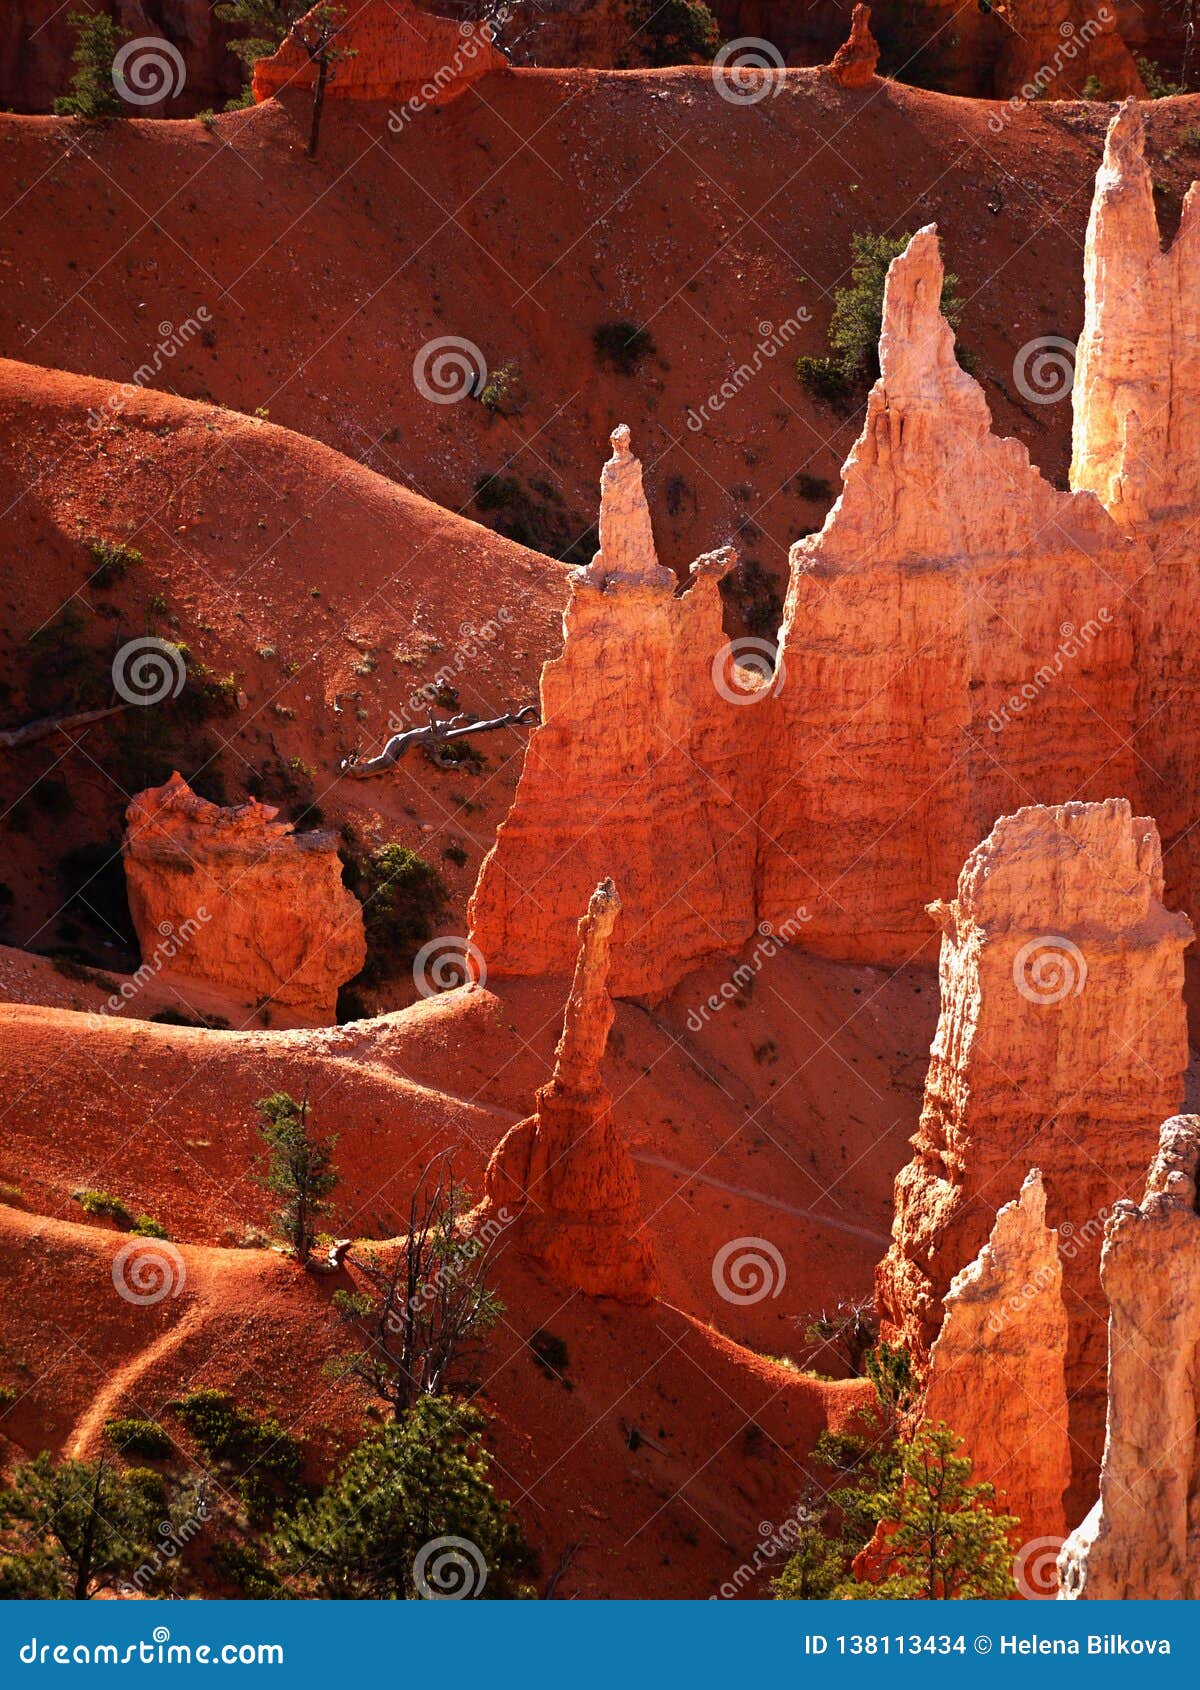 us national parks, bryce canyon national park